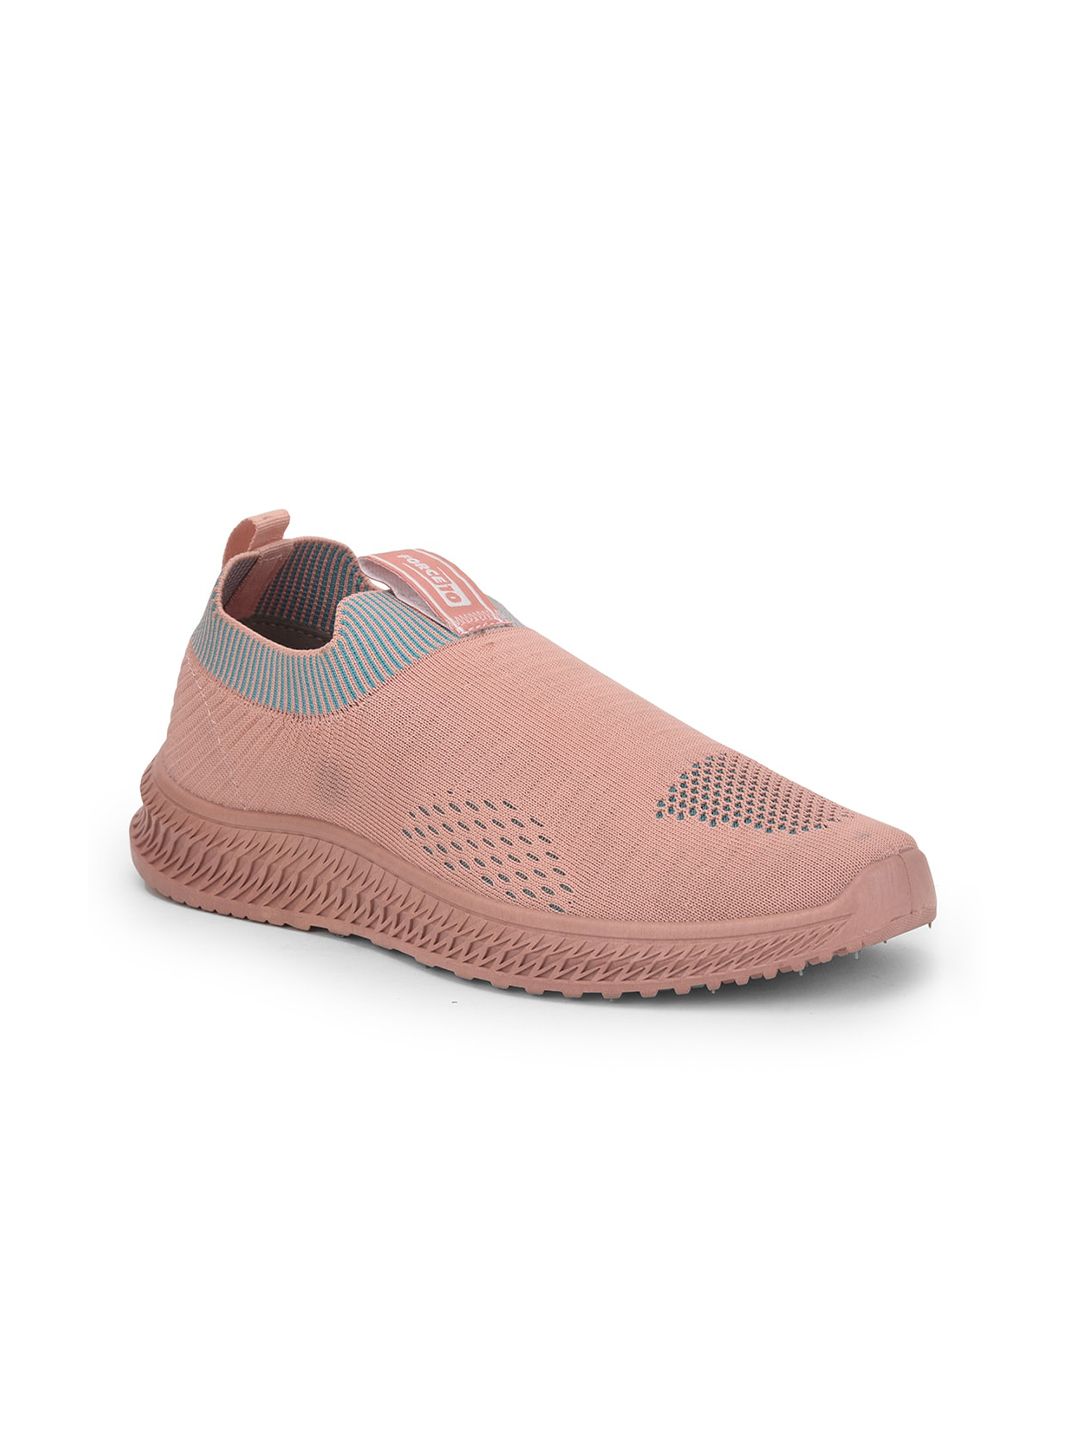 Liberty Women Peach-Coloured Mesh Running Non-Marking Shoes Price in India